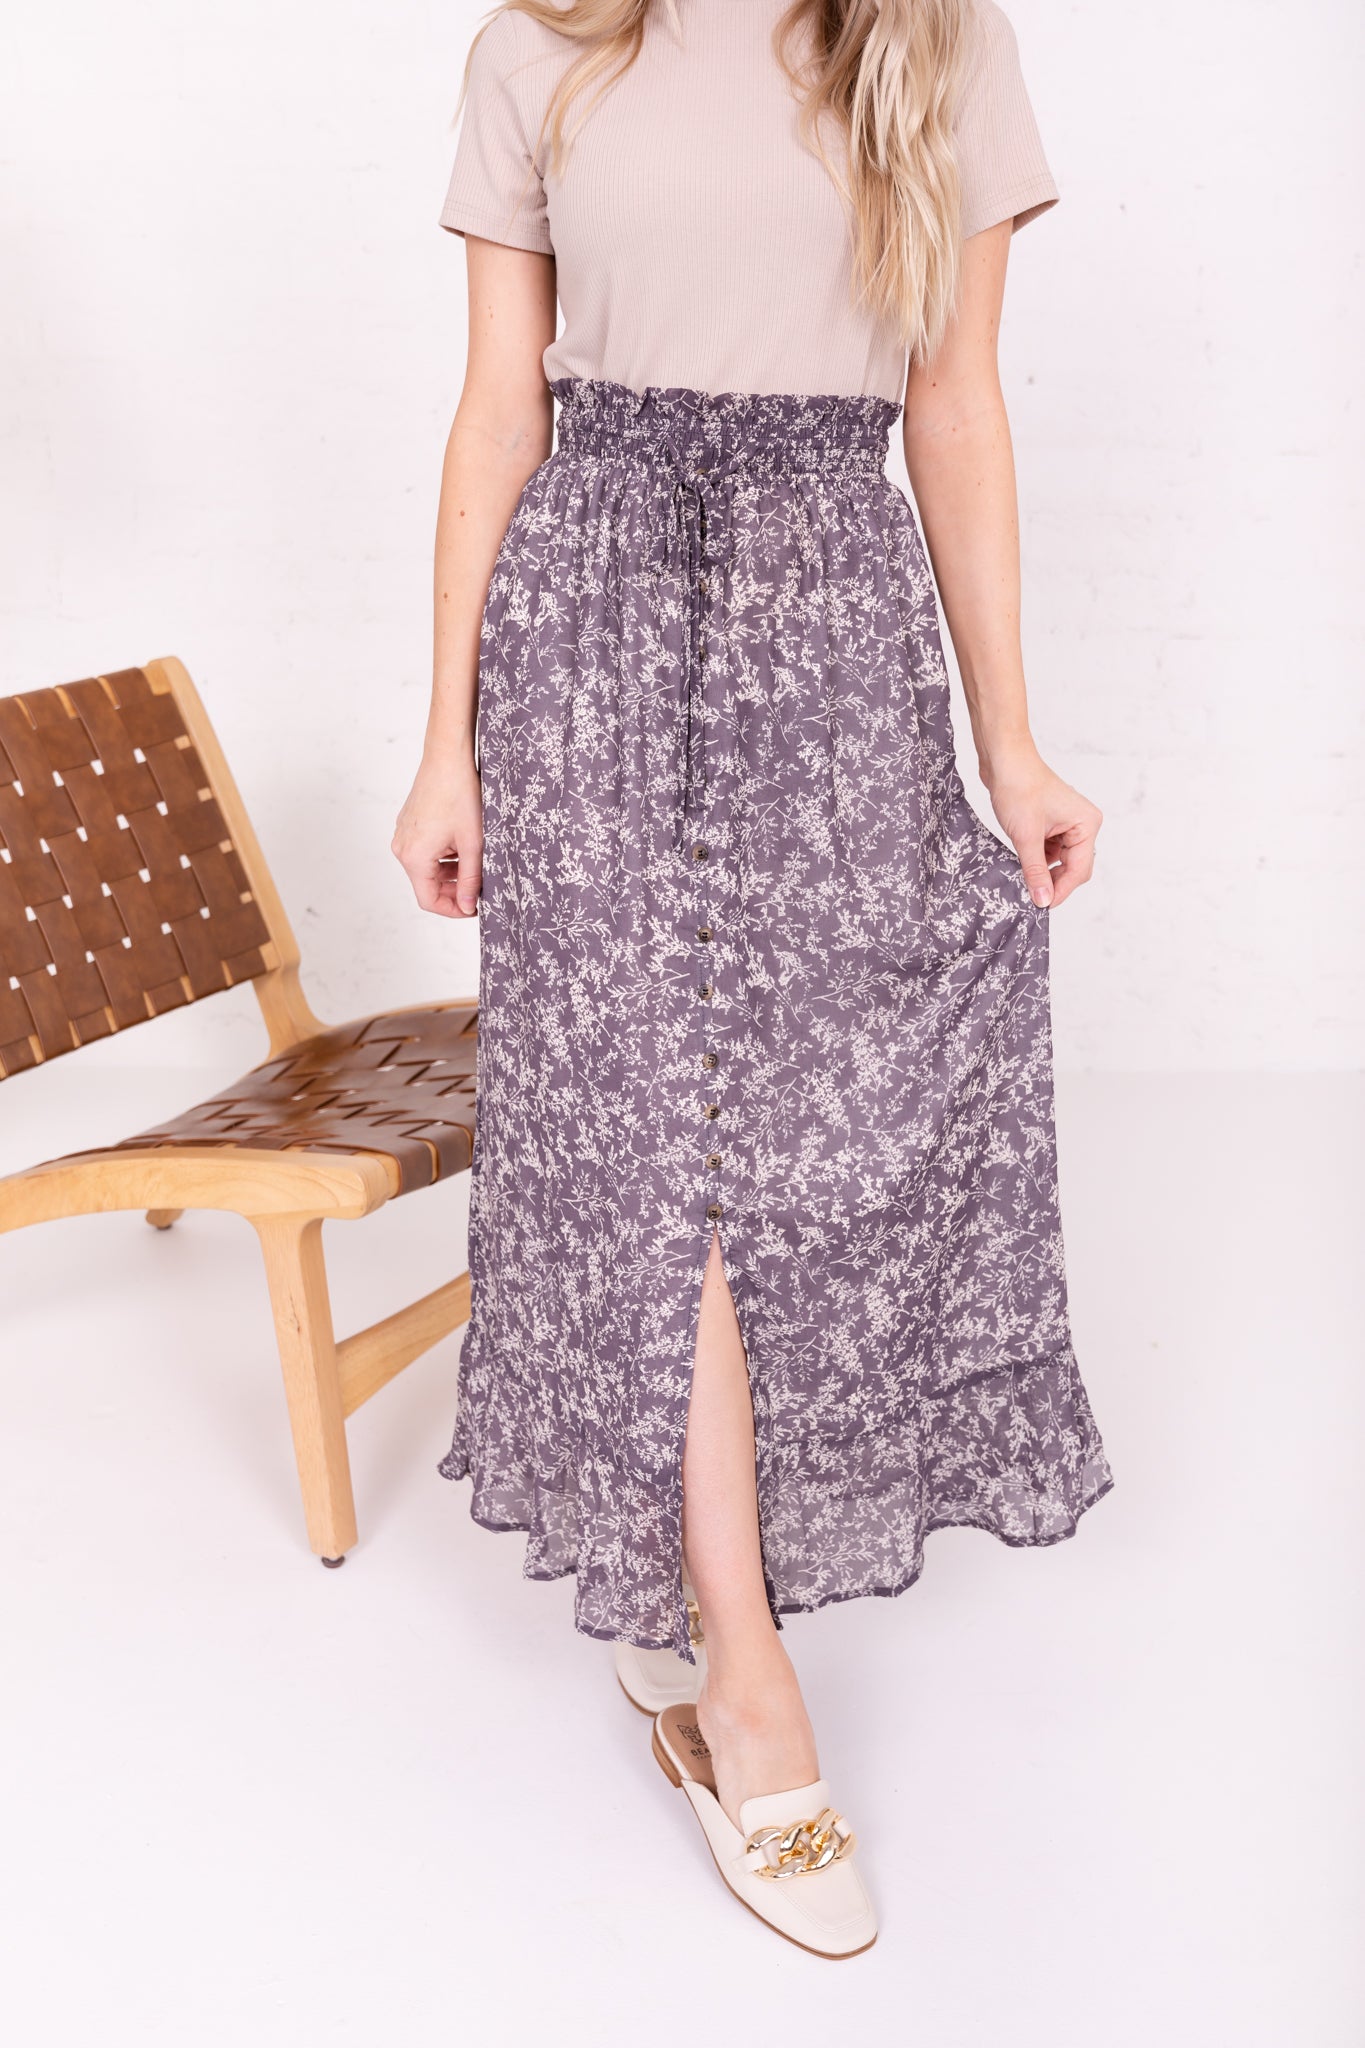 BUTTON FRONT SKIRT IN PEWTER BRANCHES